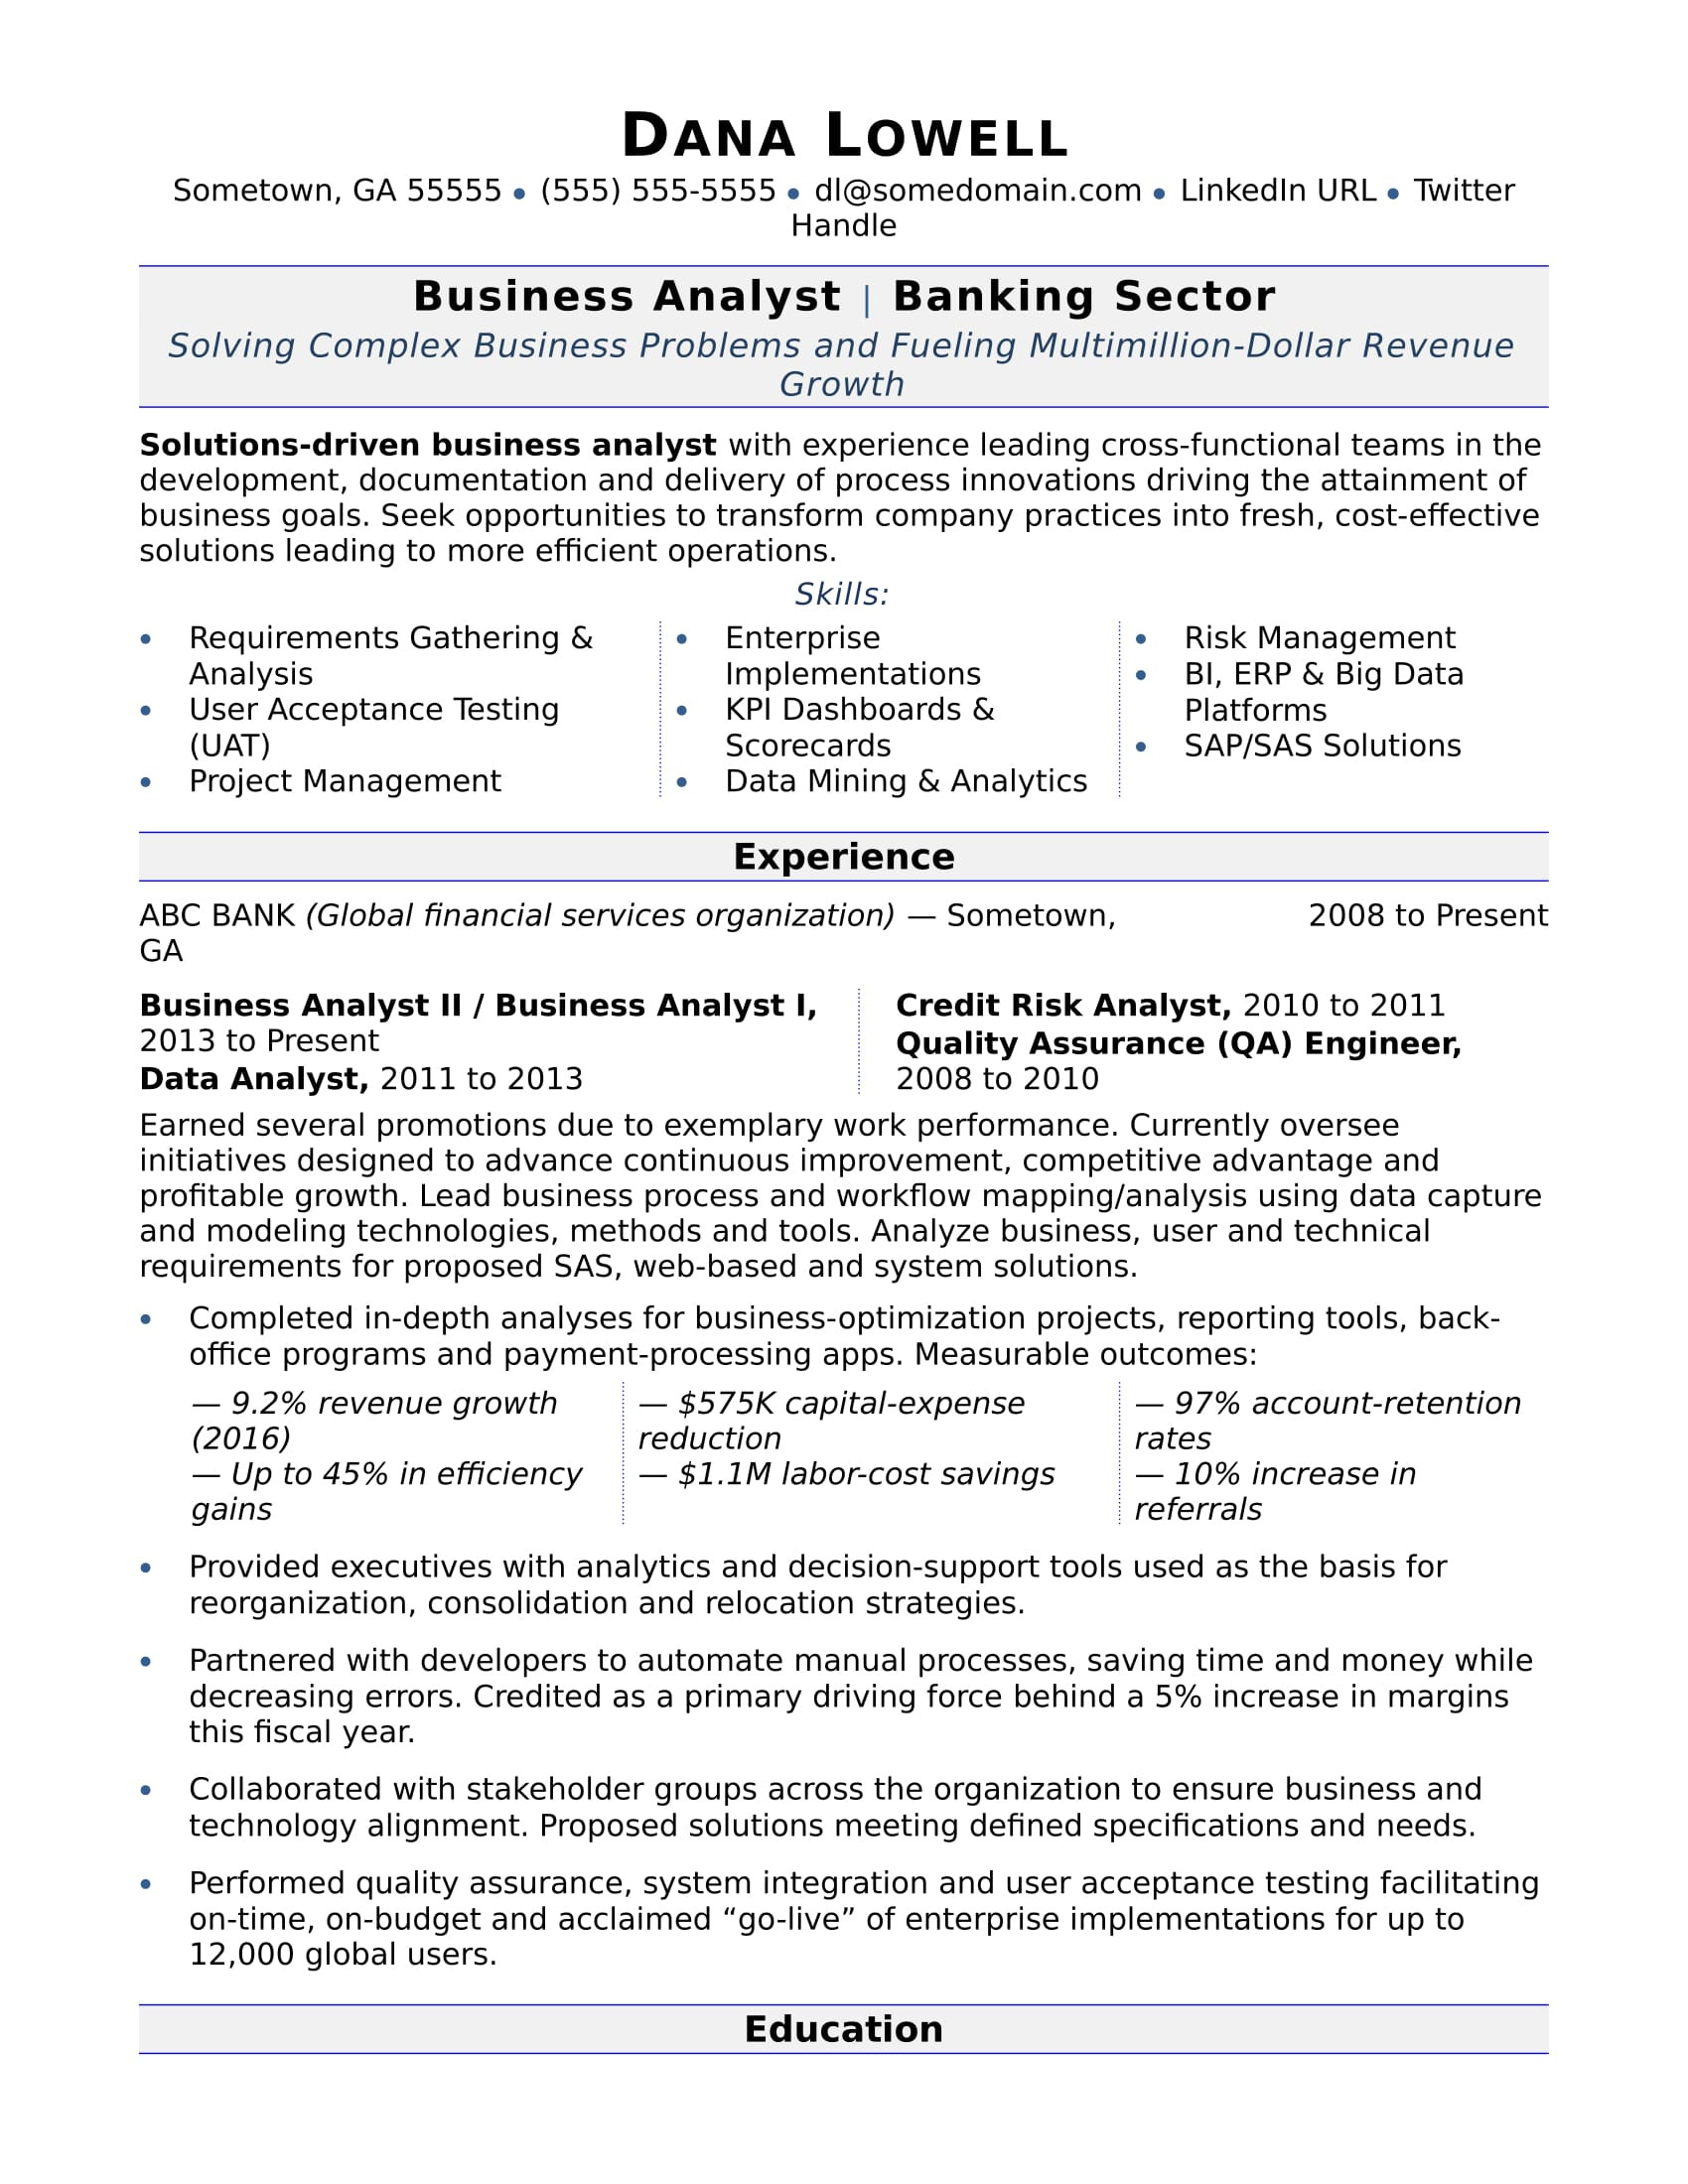 Sample Resume Of Entry Level Of Business Anlayst Business Analyst Resume Monster.com